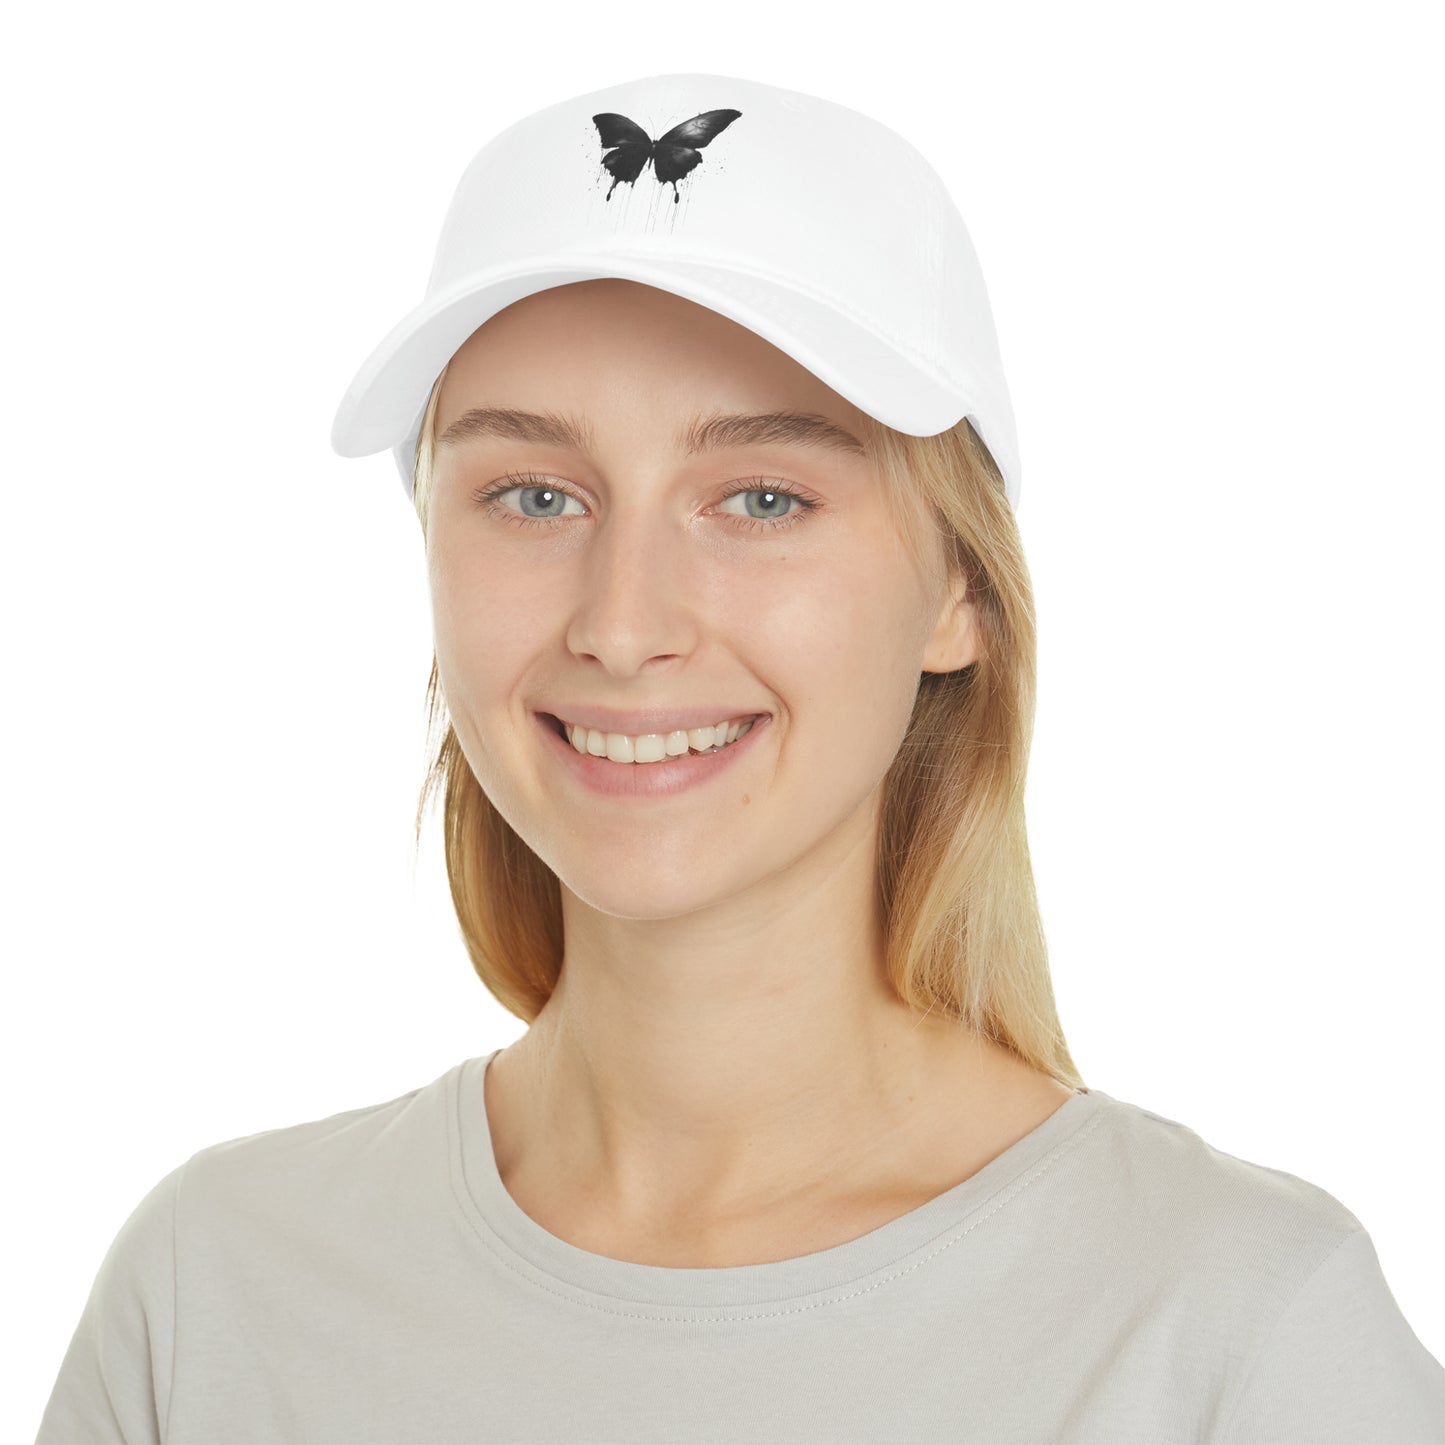 Black Butterfly Low Profile Baseball Cap, Dripping hat lid fit Artistic AI Made Cool Artsy Design Dark Style Edgy